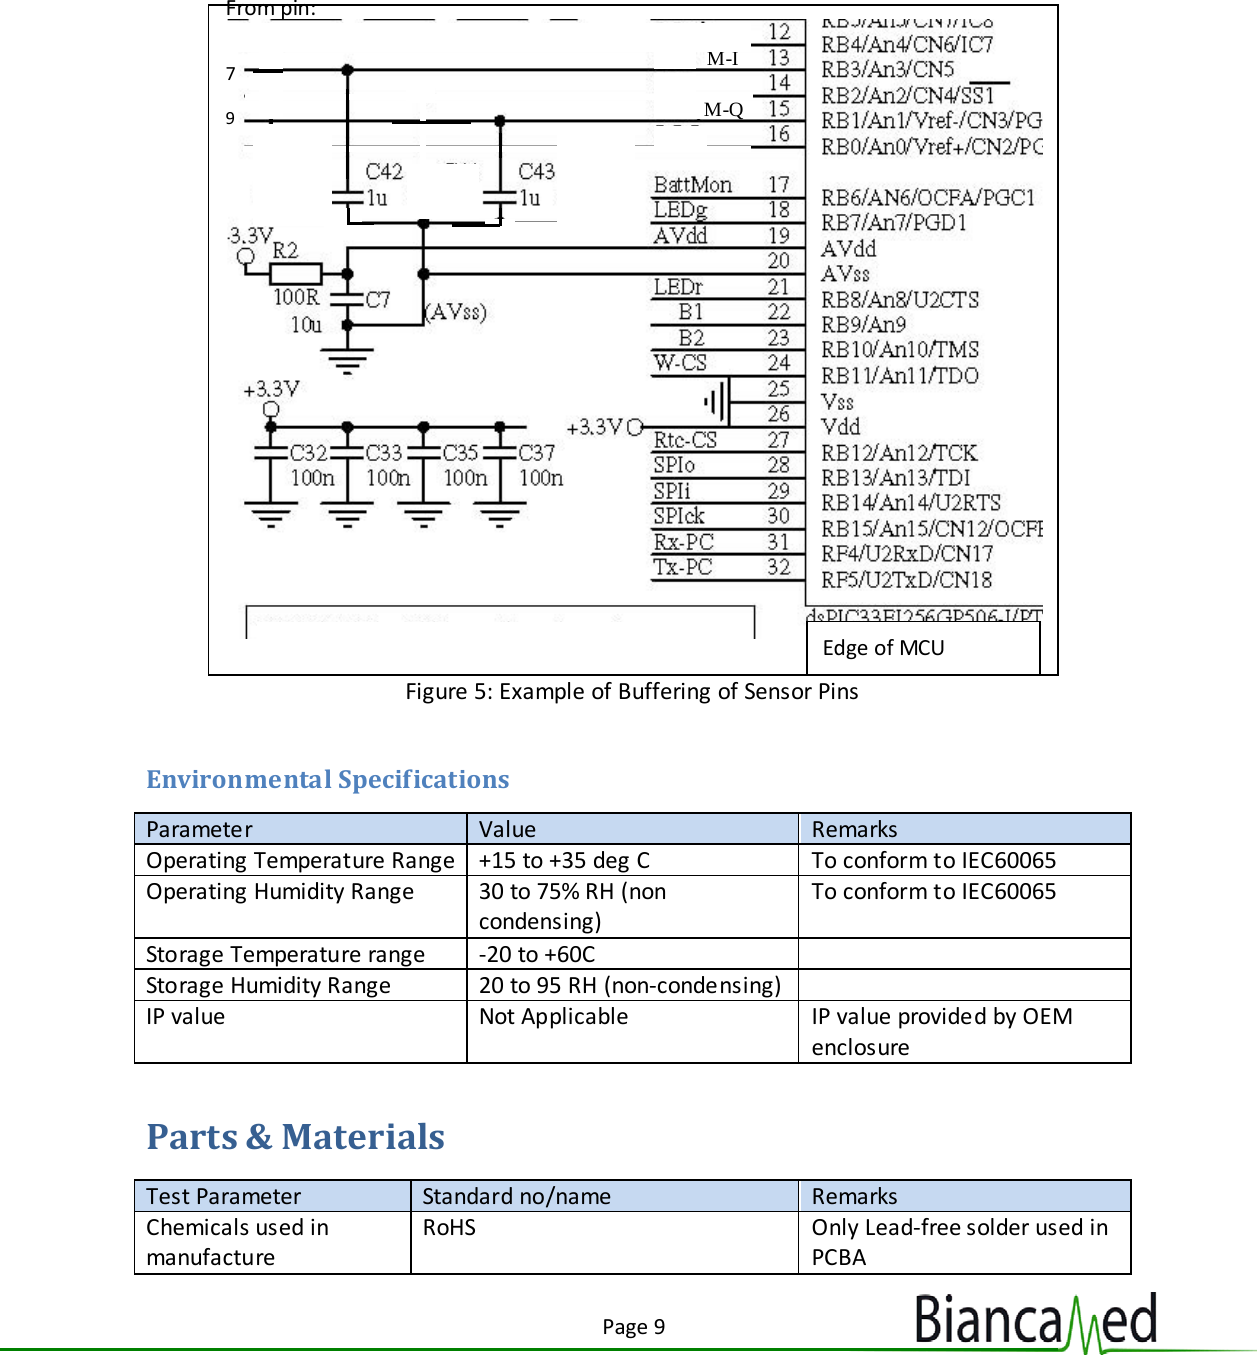 Page 9   Figure 5: Example of Buffering of Sensor Pins   Environmental Specifications Parameter Value Remarks Operating Temperature Range +15 to +35 deg C To conform to IEC60065 Operating Humidity Range  30 to 75% RH (non condensing) To conform to IEC60065 Storage Temperature range  -20 to +60C  Storage Humidity Range 20 to 95 RH (non-condensing)  IP value Not Applicable IP value provided by OEM enclosure Parts &amp; Materials Test Parameter Standard no/name Remarks Chemicals used in manufacture RoHS Only Lead-free solder used in PCBA  M-I M-Q V ref From pin: 5 7  9 Edge of MCU 